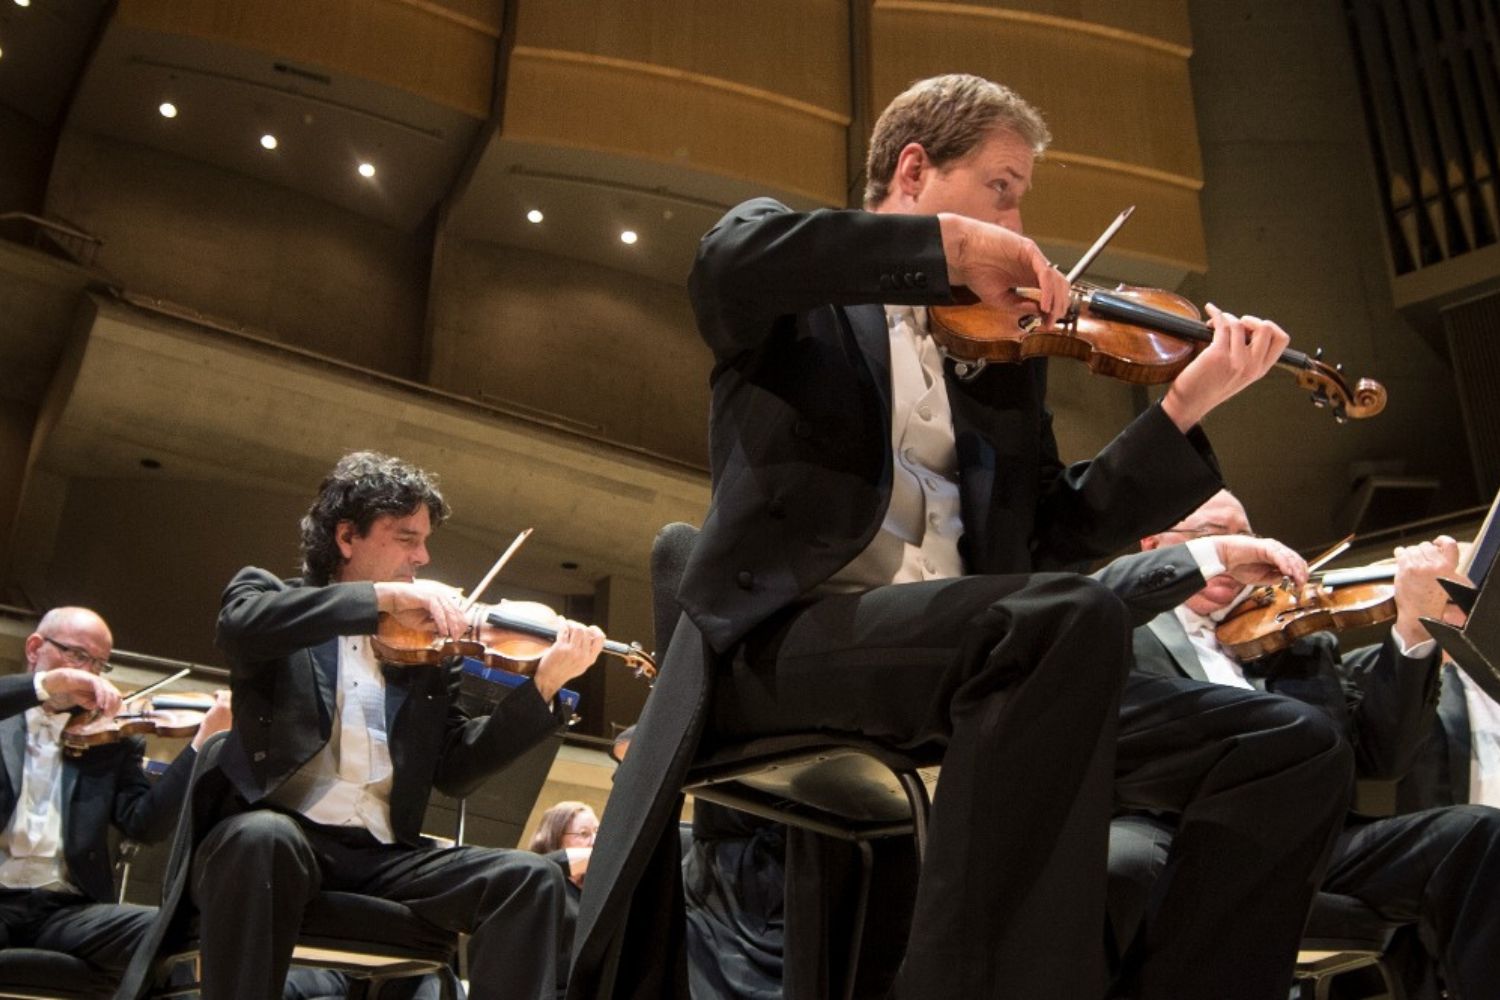 Toronto Symphony Orchestra just announced 5 new concerts